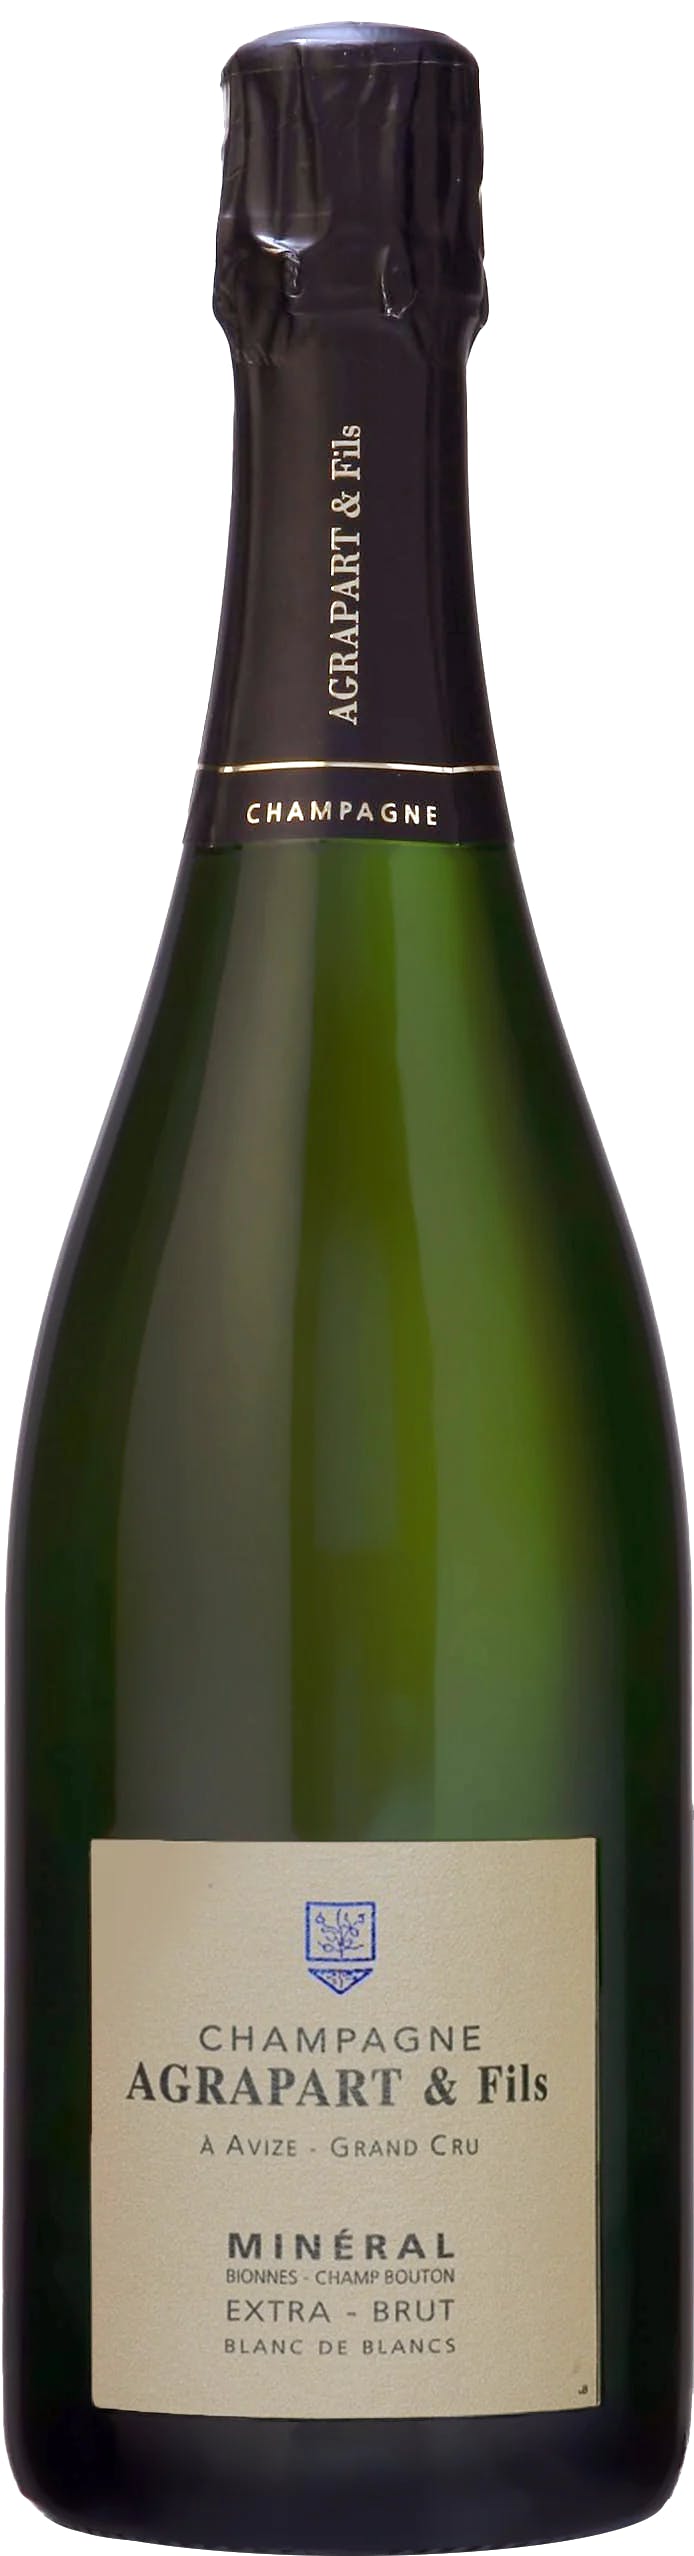 Champagne - Domaine Franey